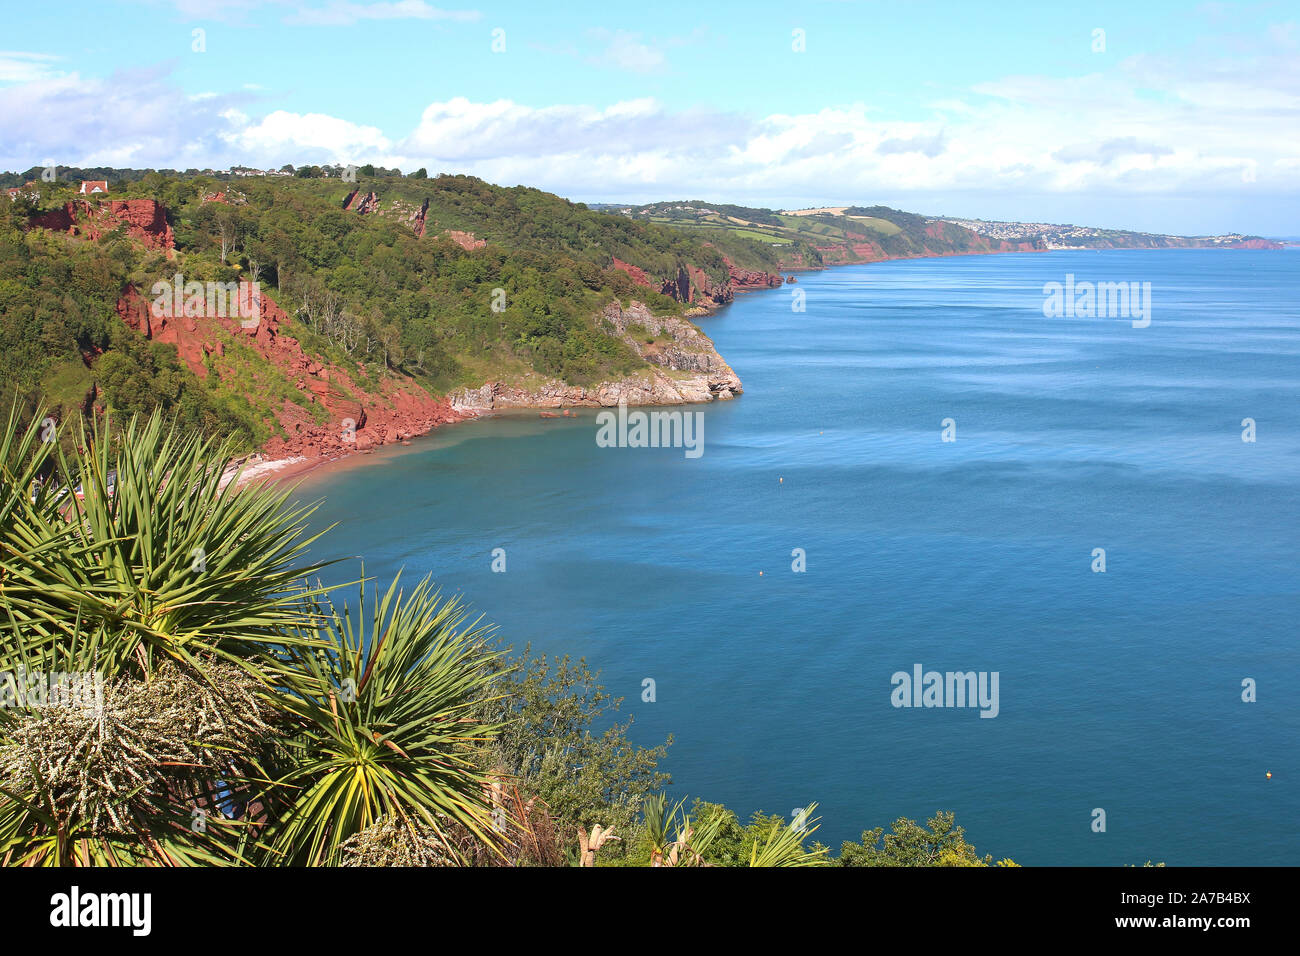 Babbacombe Bay seen from the cliff top looking along the coast towards Dawlish, Exmouth and the River Exe. Babbacombe is part of Torquay in Devon. Stock Photo